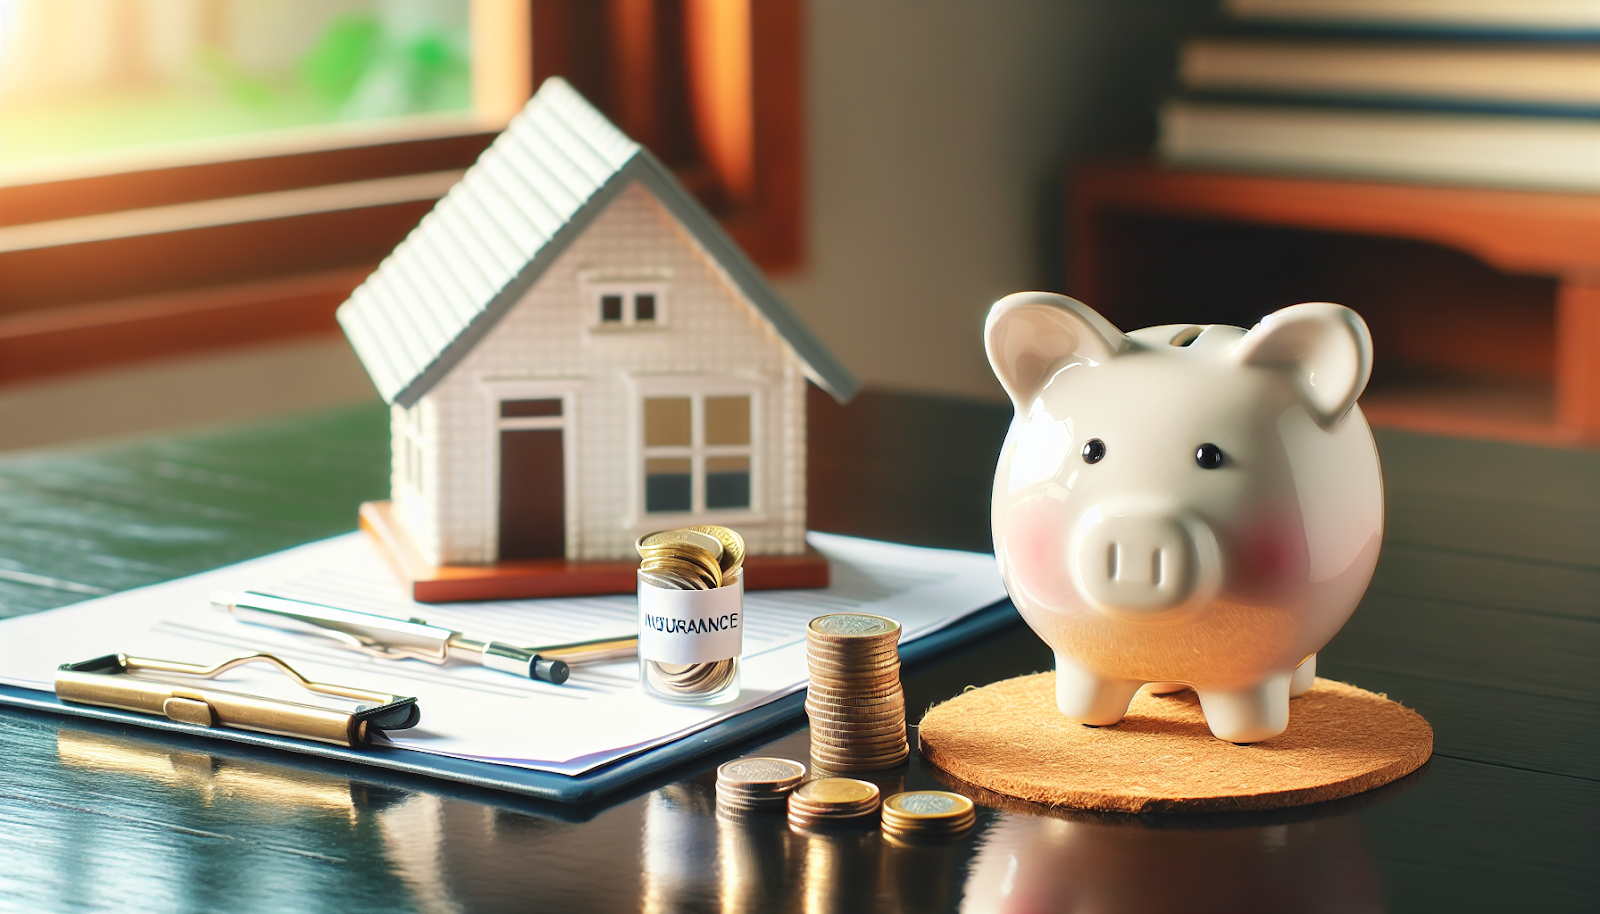 Piggy bank with coins representing saving for additional homeownership costs